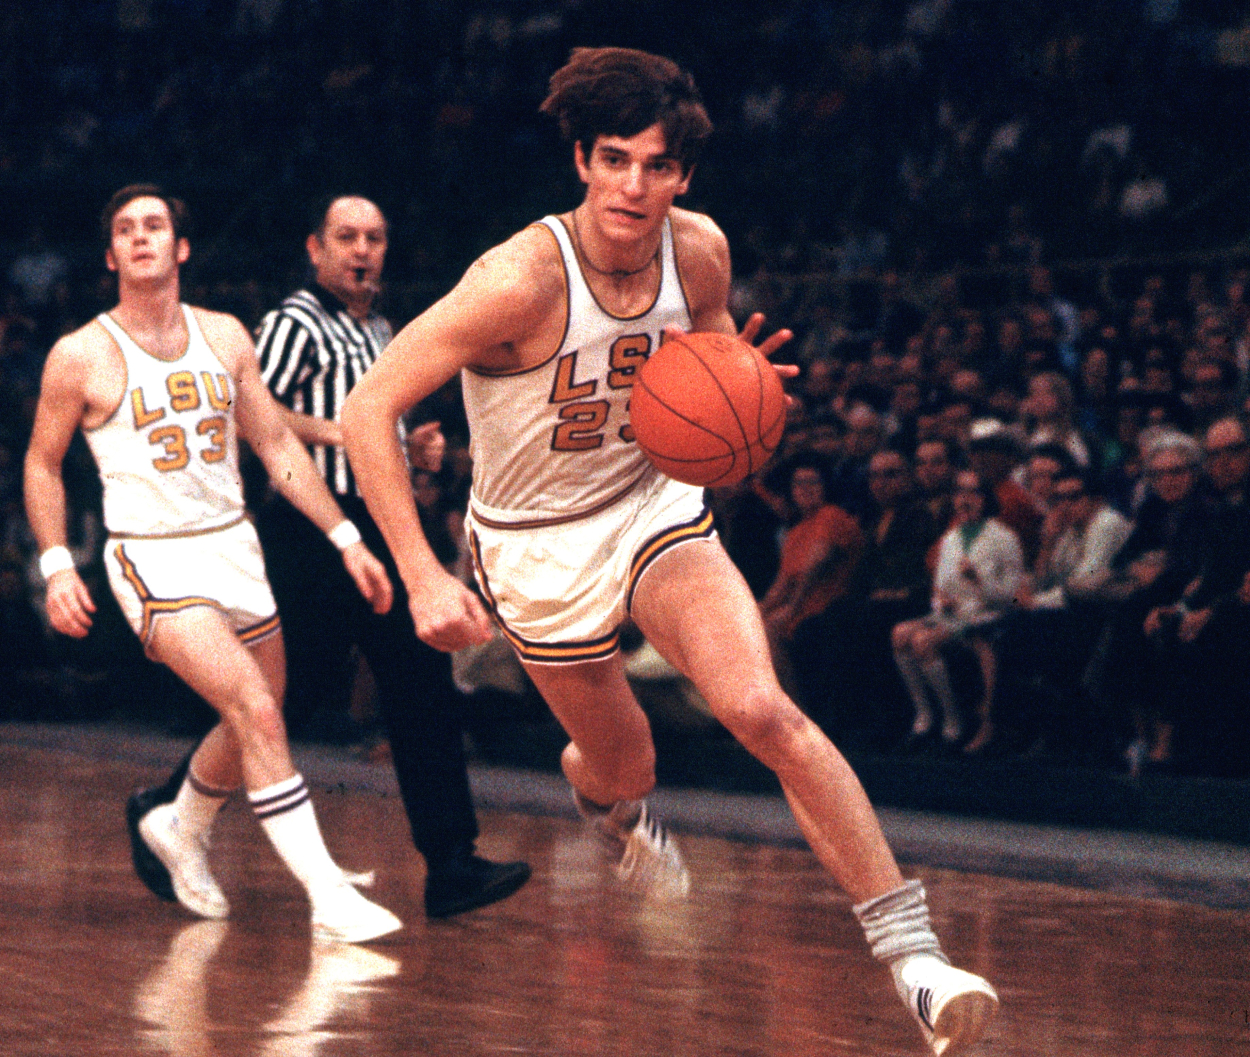 Pete Maravich’s 35-Foot Hook Shot Had the Opposing Team Carrying Him in Celebration